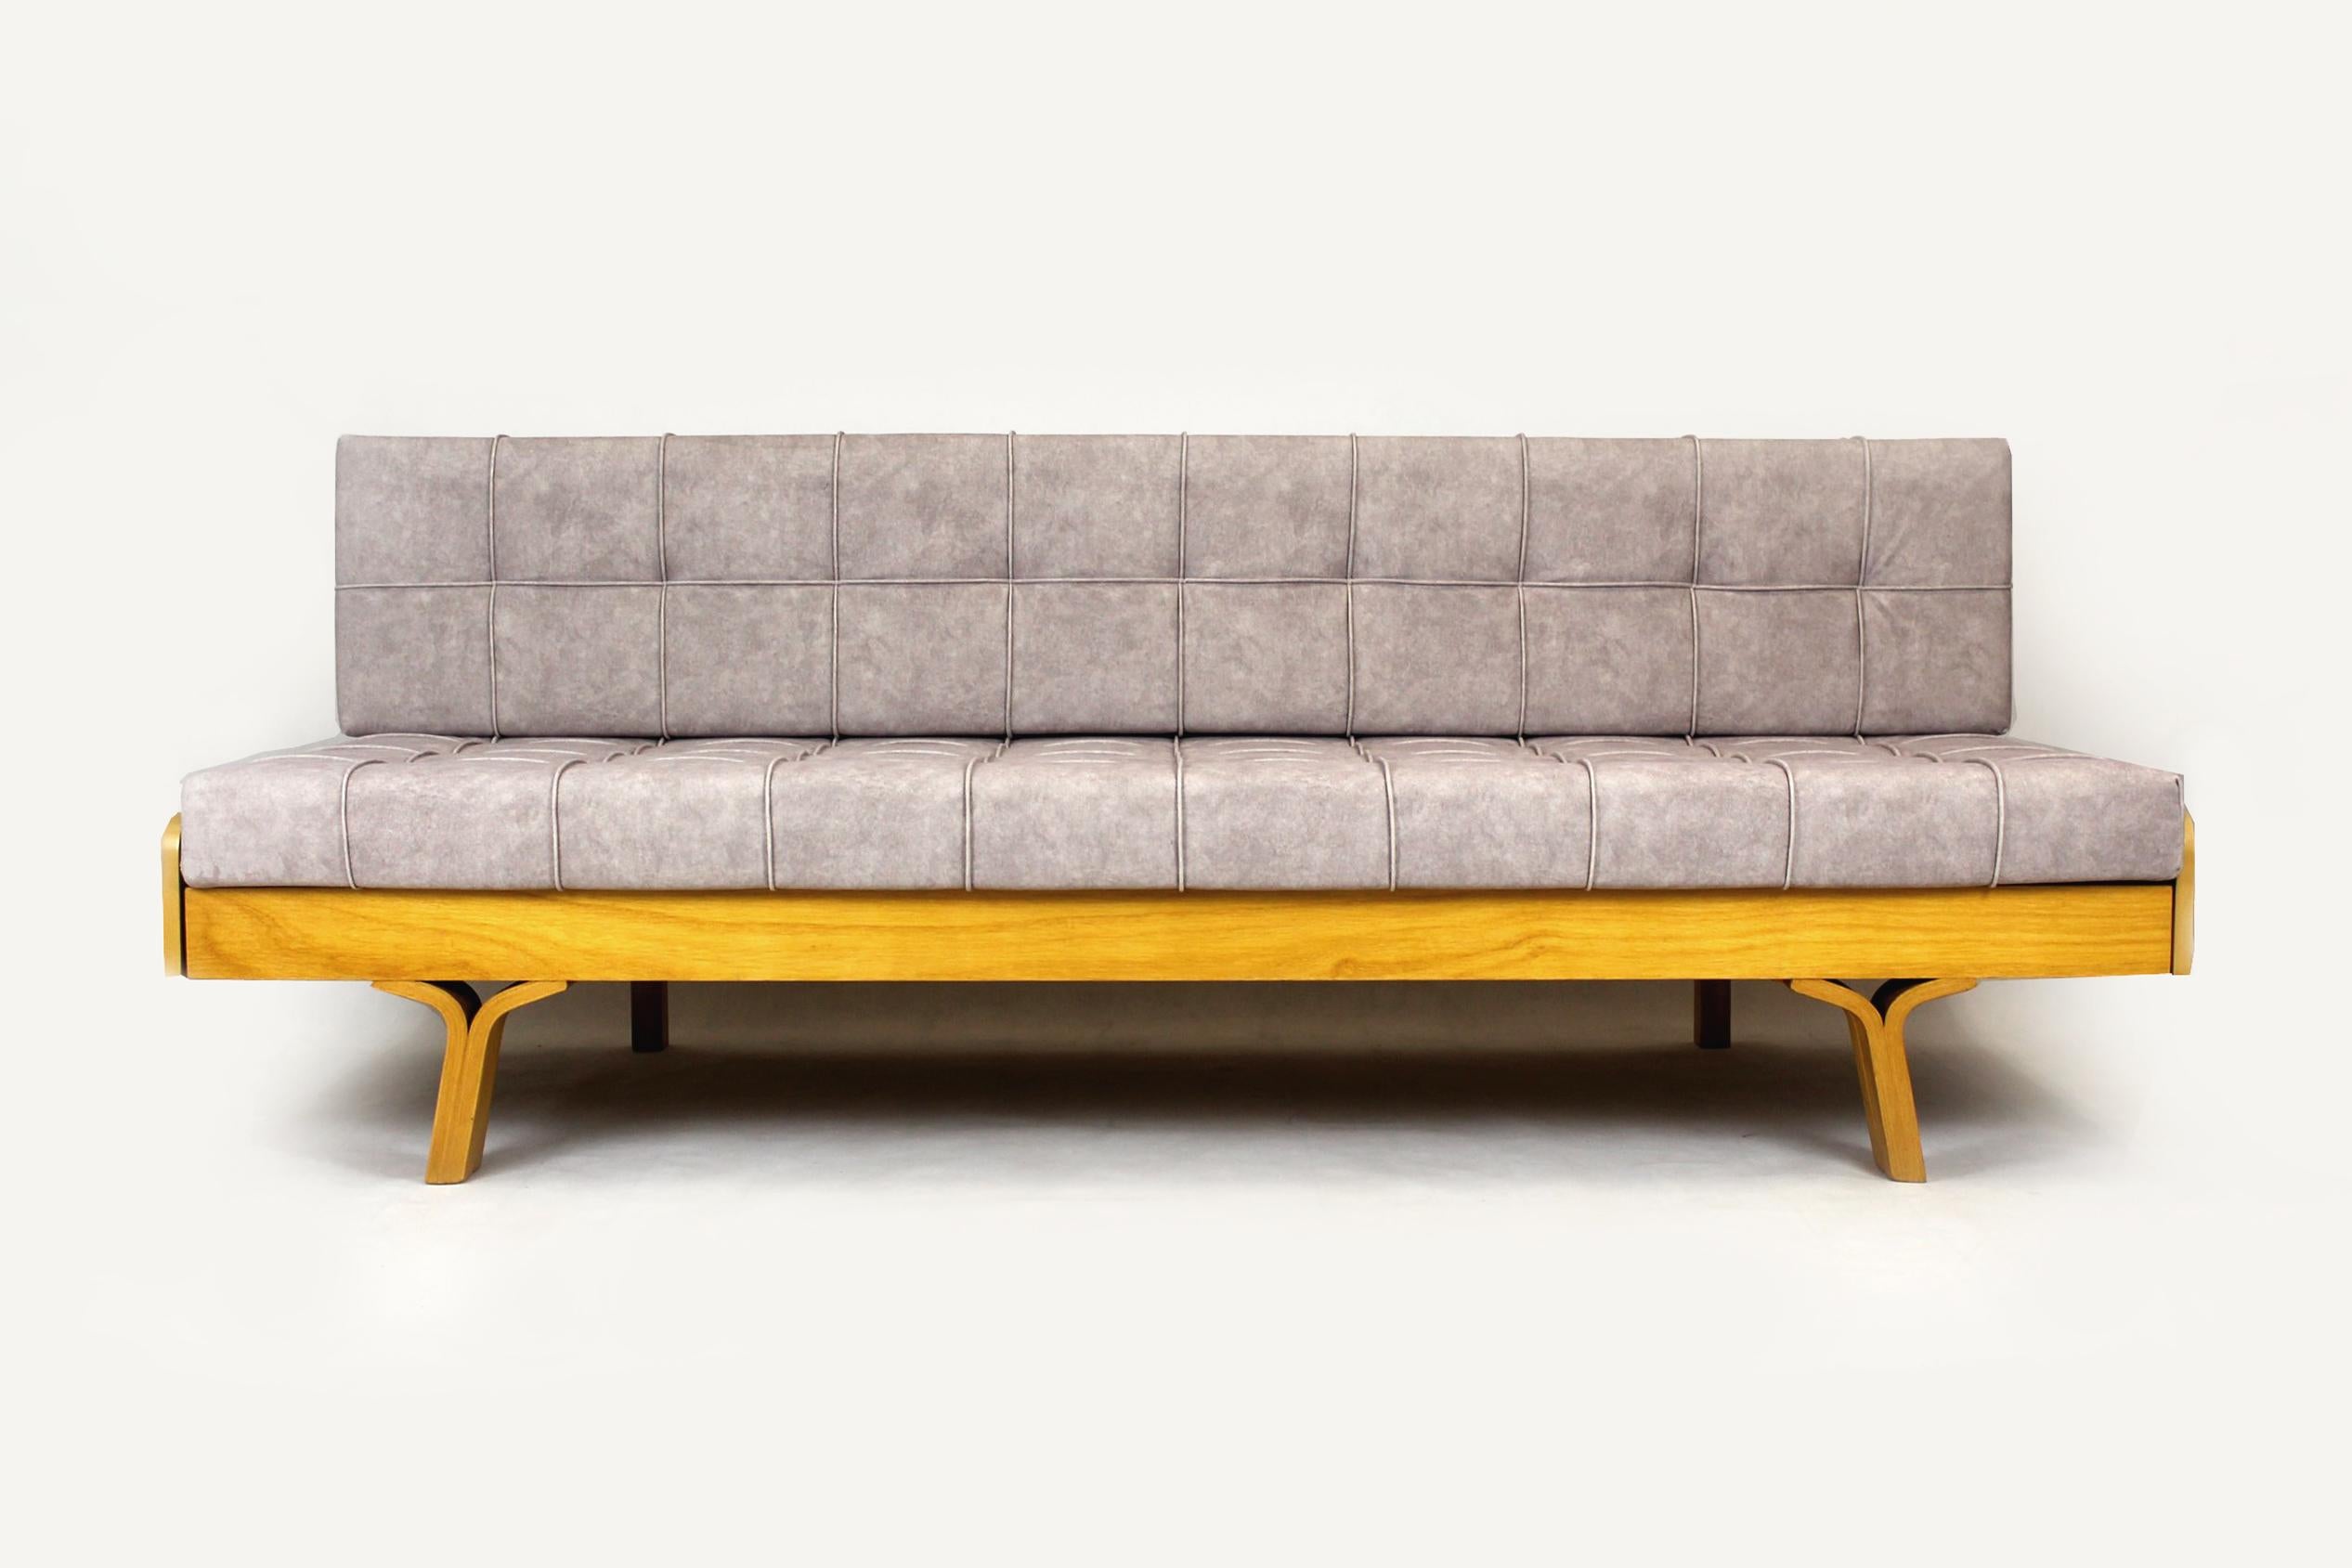 This Mid-Century Modern sofa was designed by Ludvik Volak and produced by Holesov in the 1960s in Czechoslovakia. The couch simply converts into a full-size bed: 196x157cm. 
The sofa has been restored, it has new cushions upholstered in